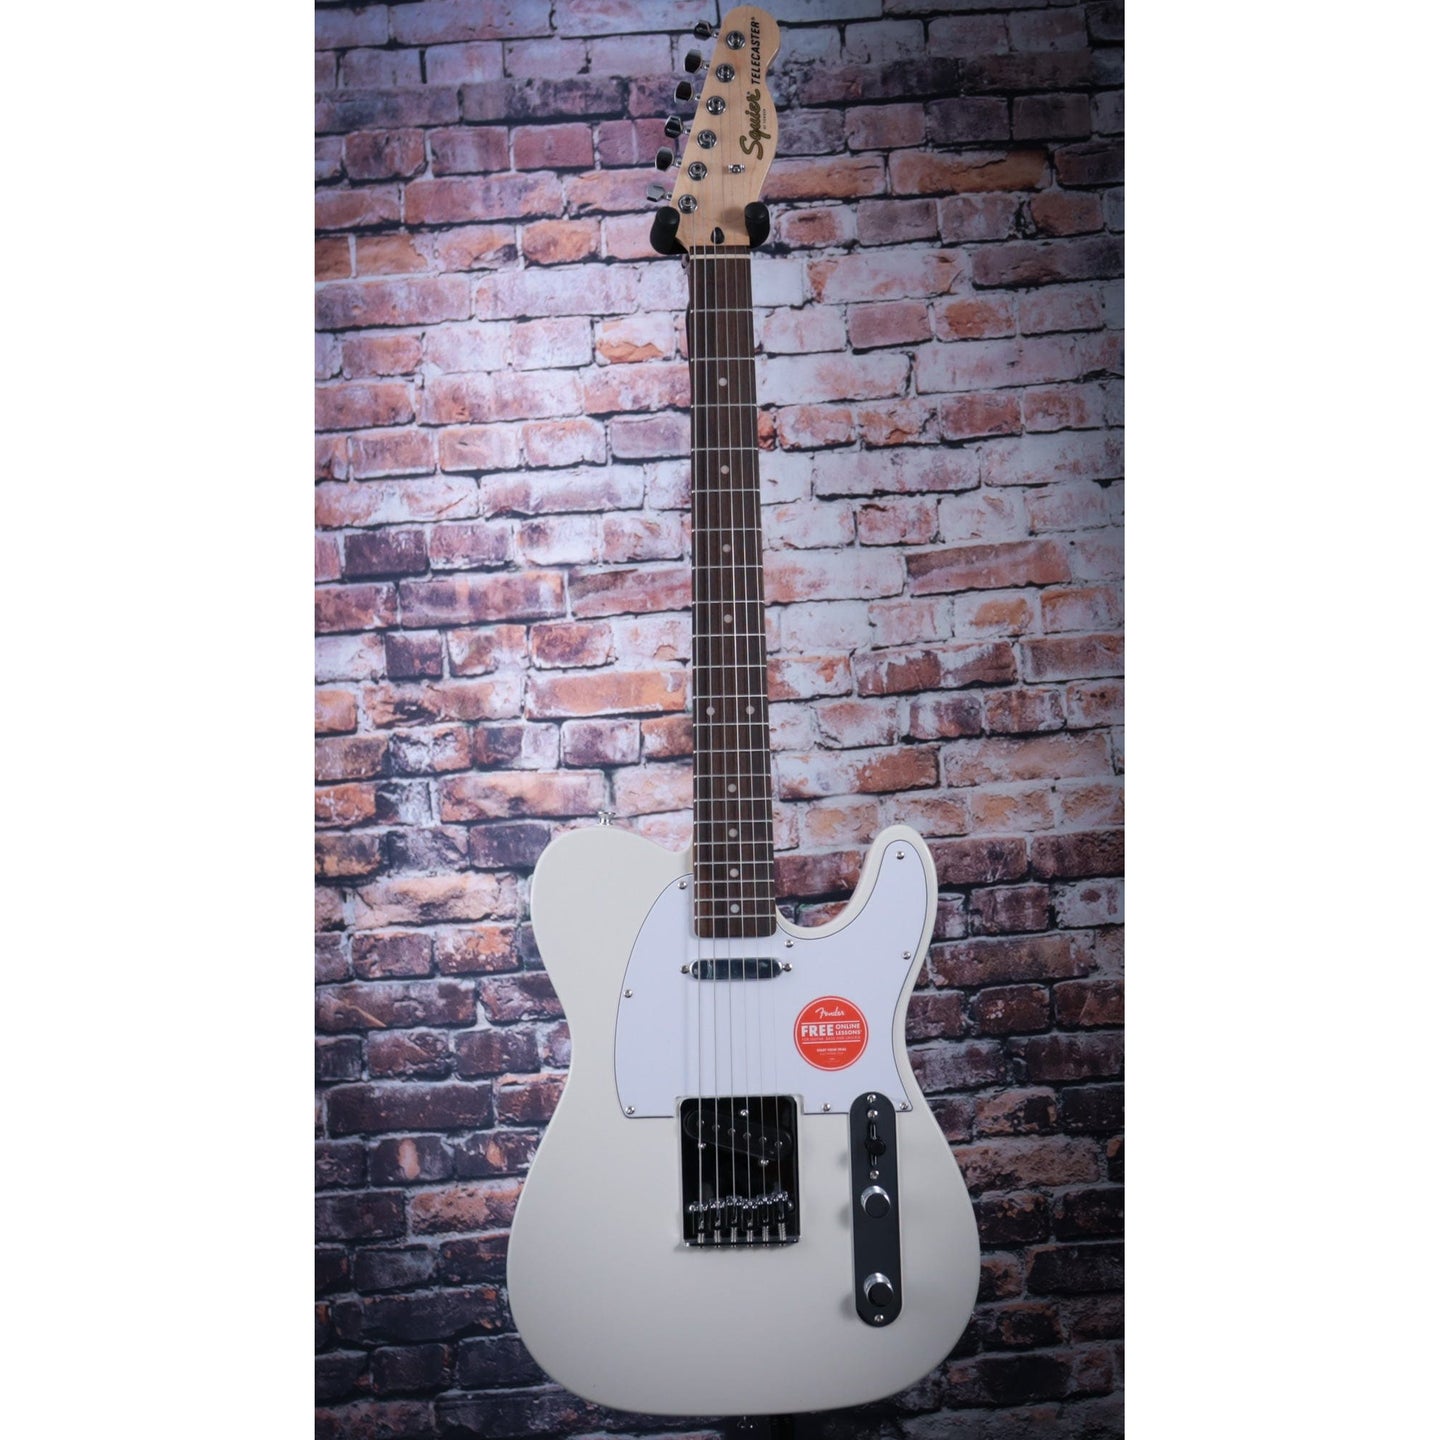 Squier Affinity Series Telecaster, Olympic White